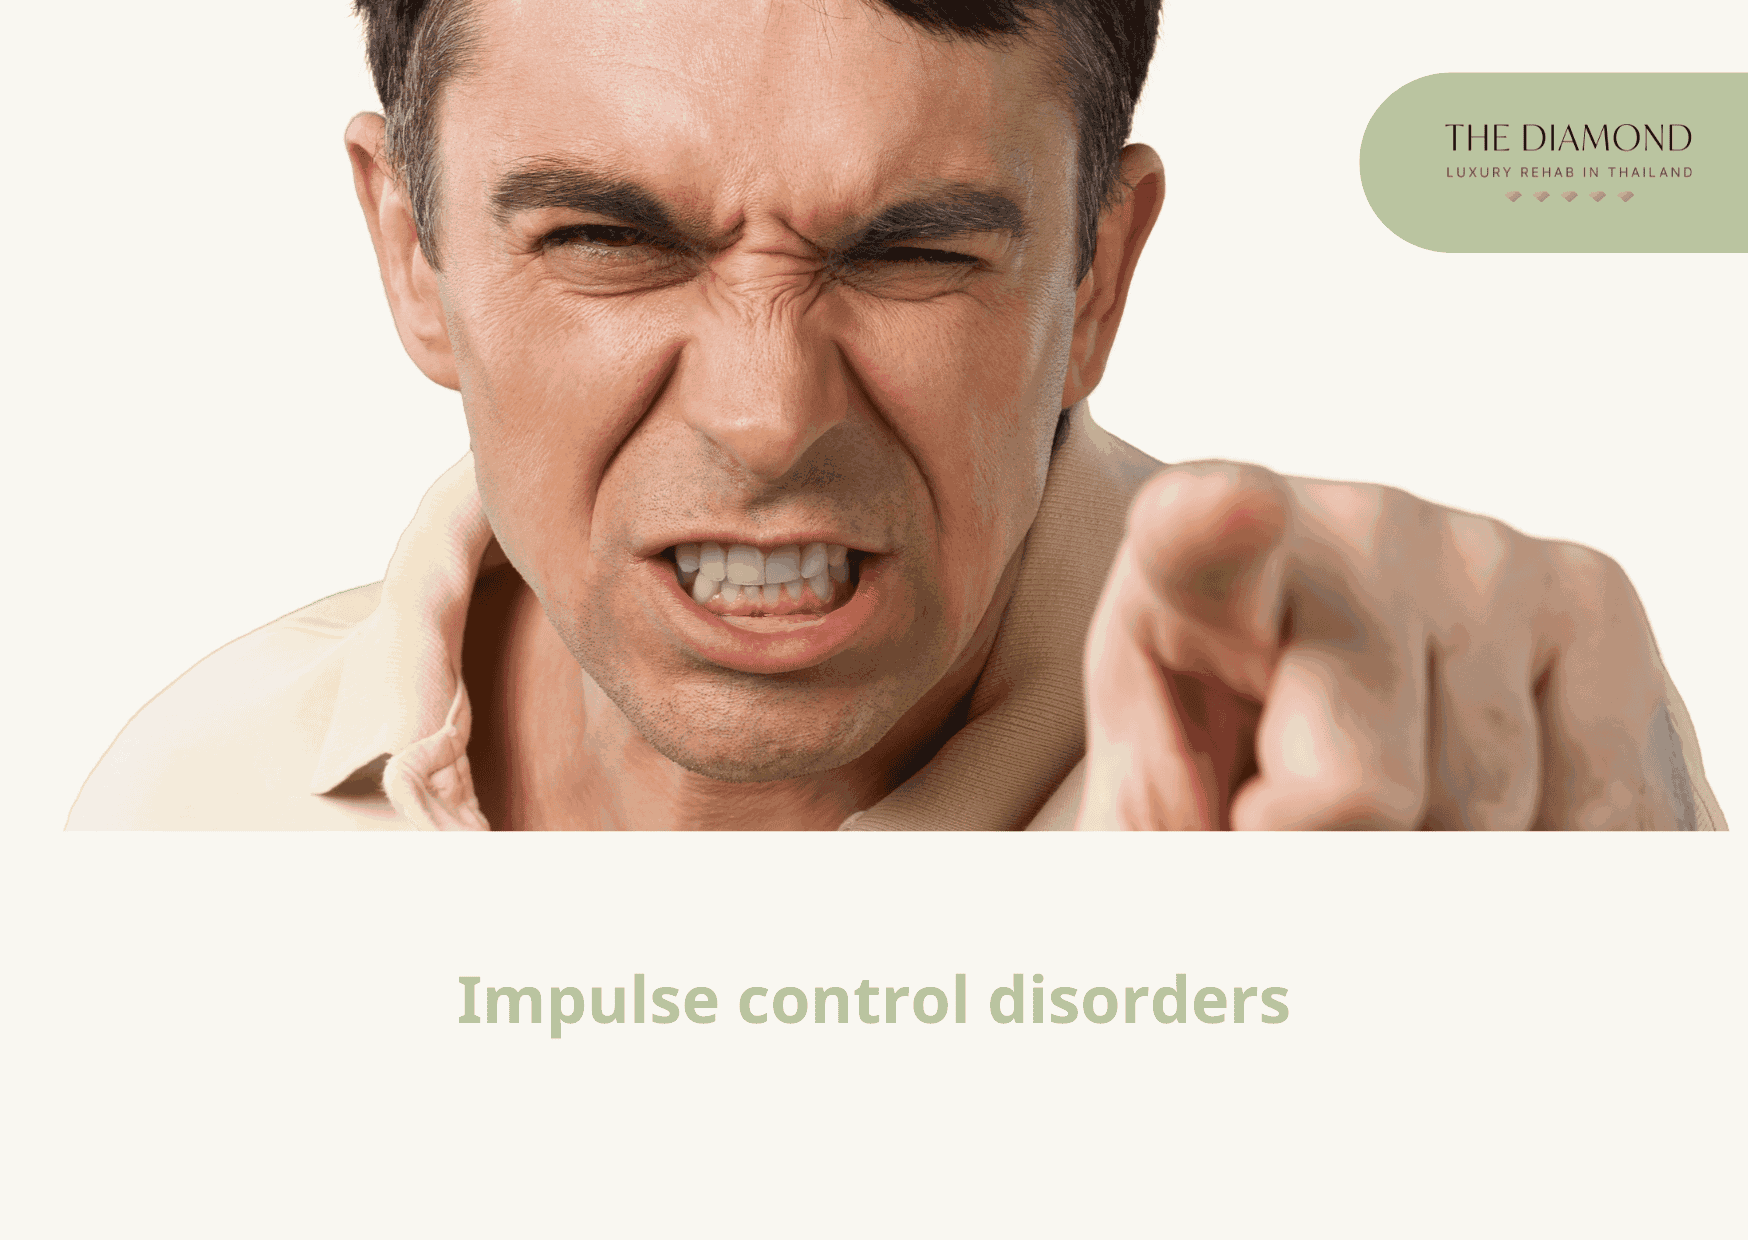 What is Impulse control disorder